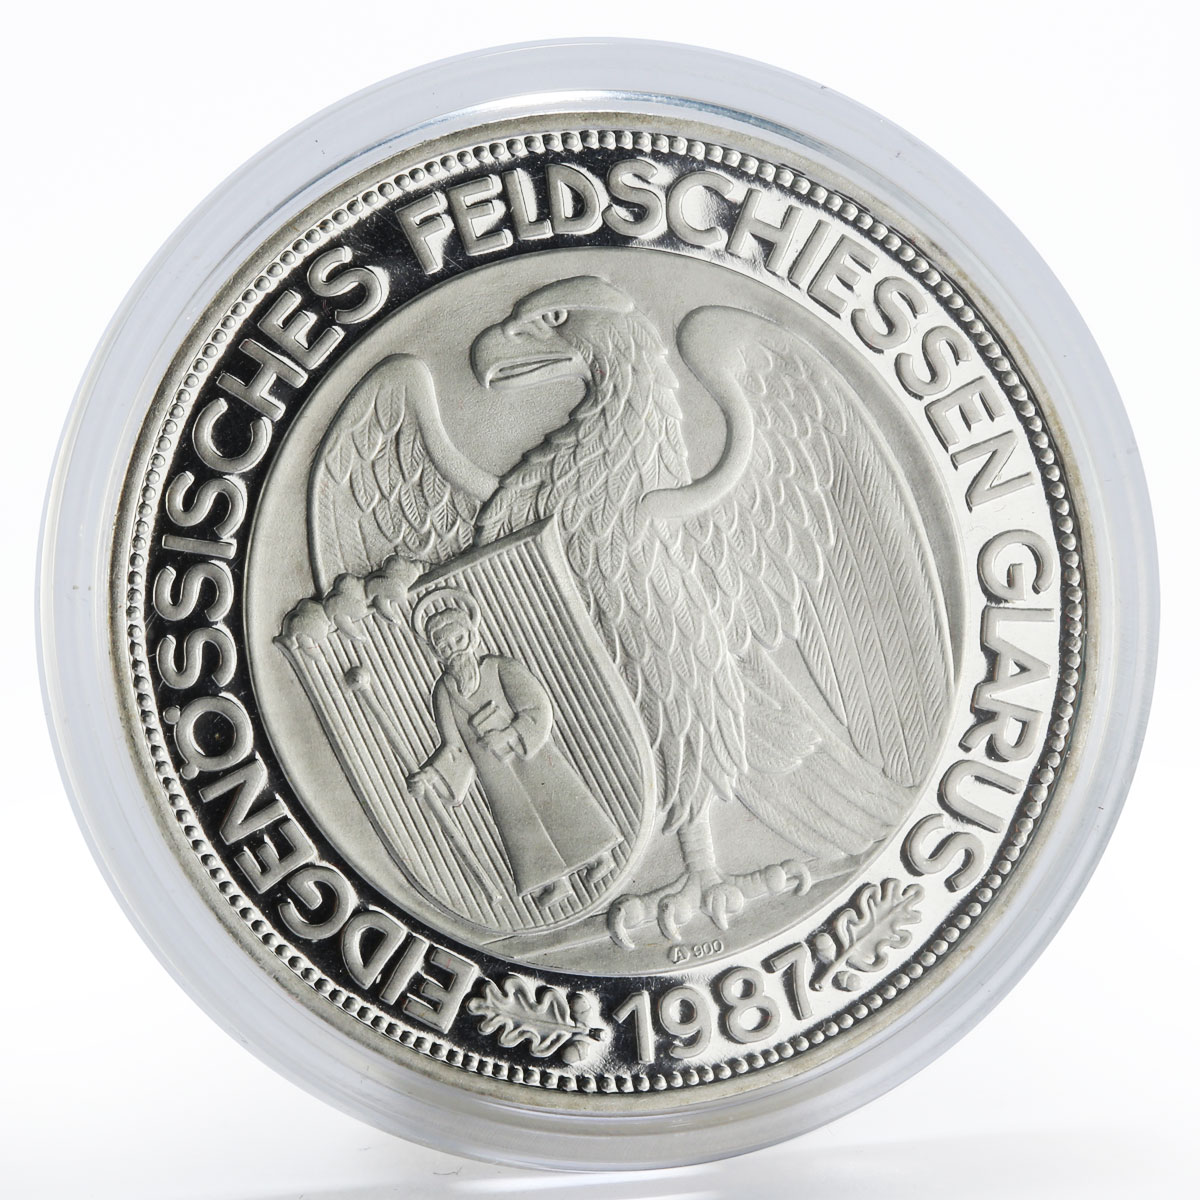 Switzerland 50 francs Glarus Shooting Festival proof silver coin 1987